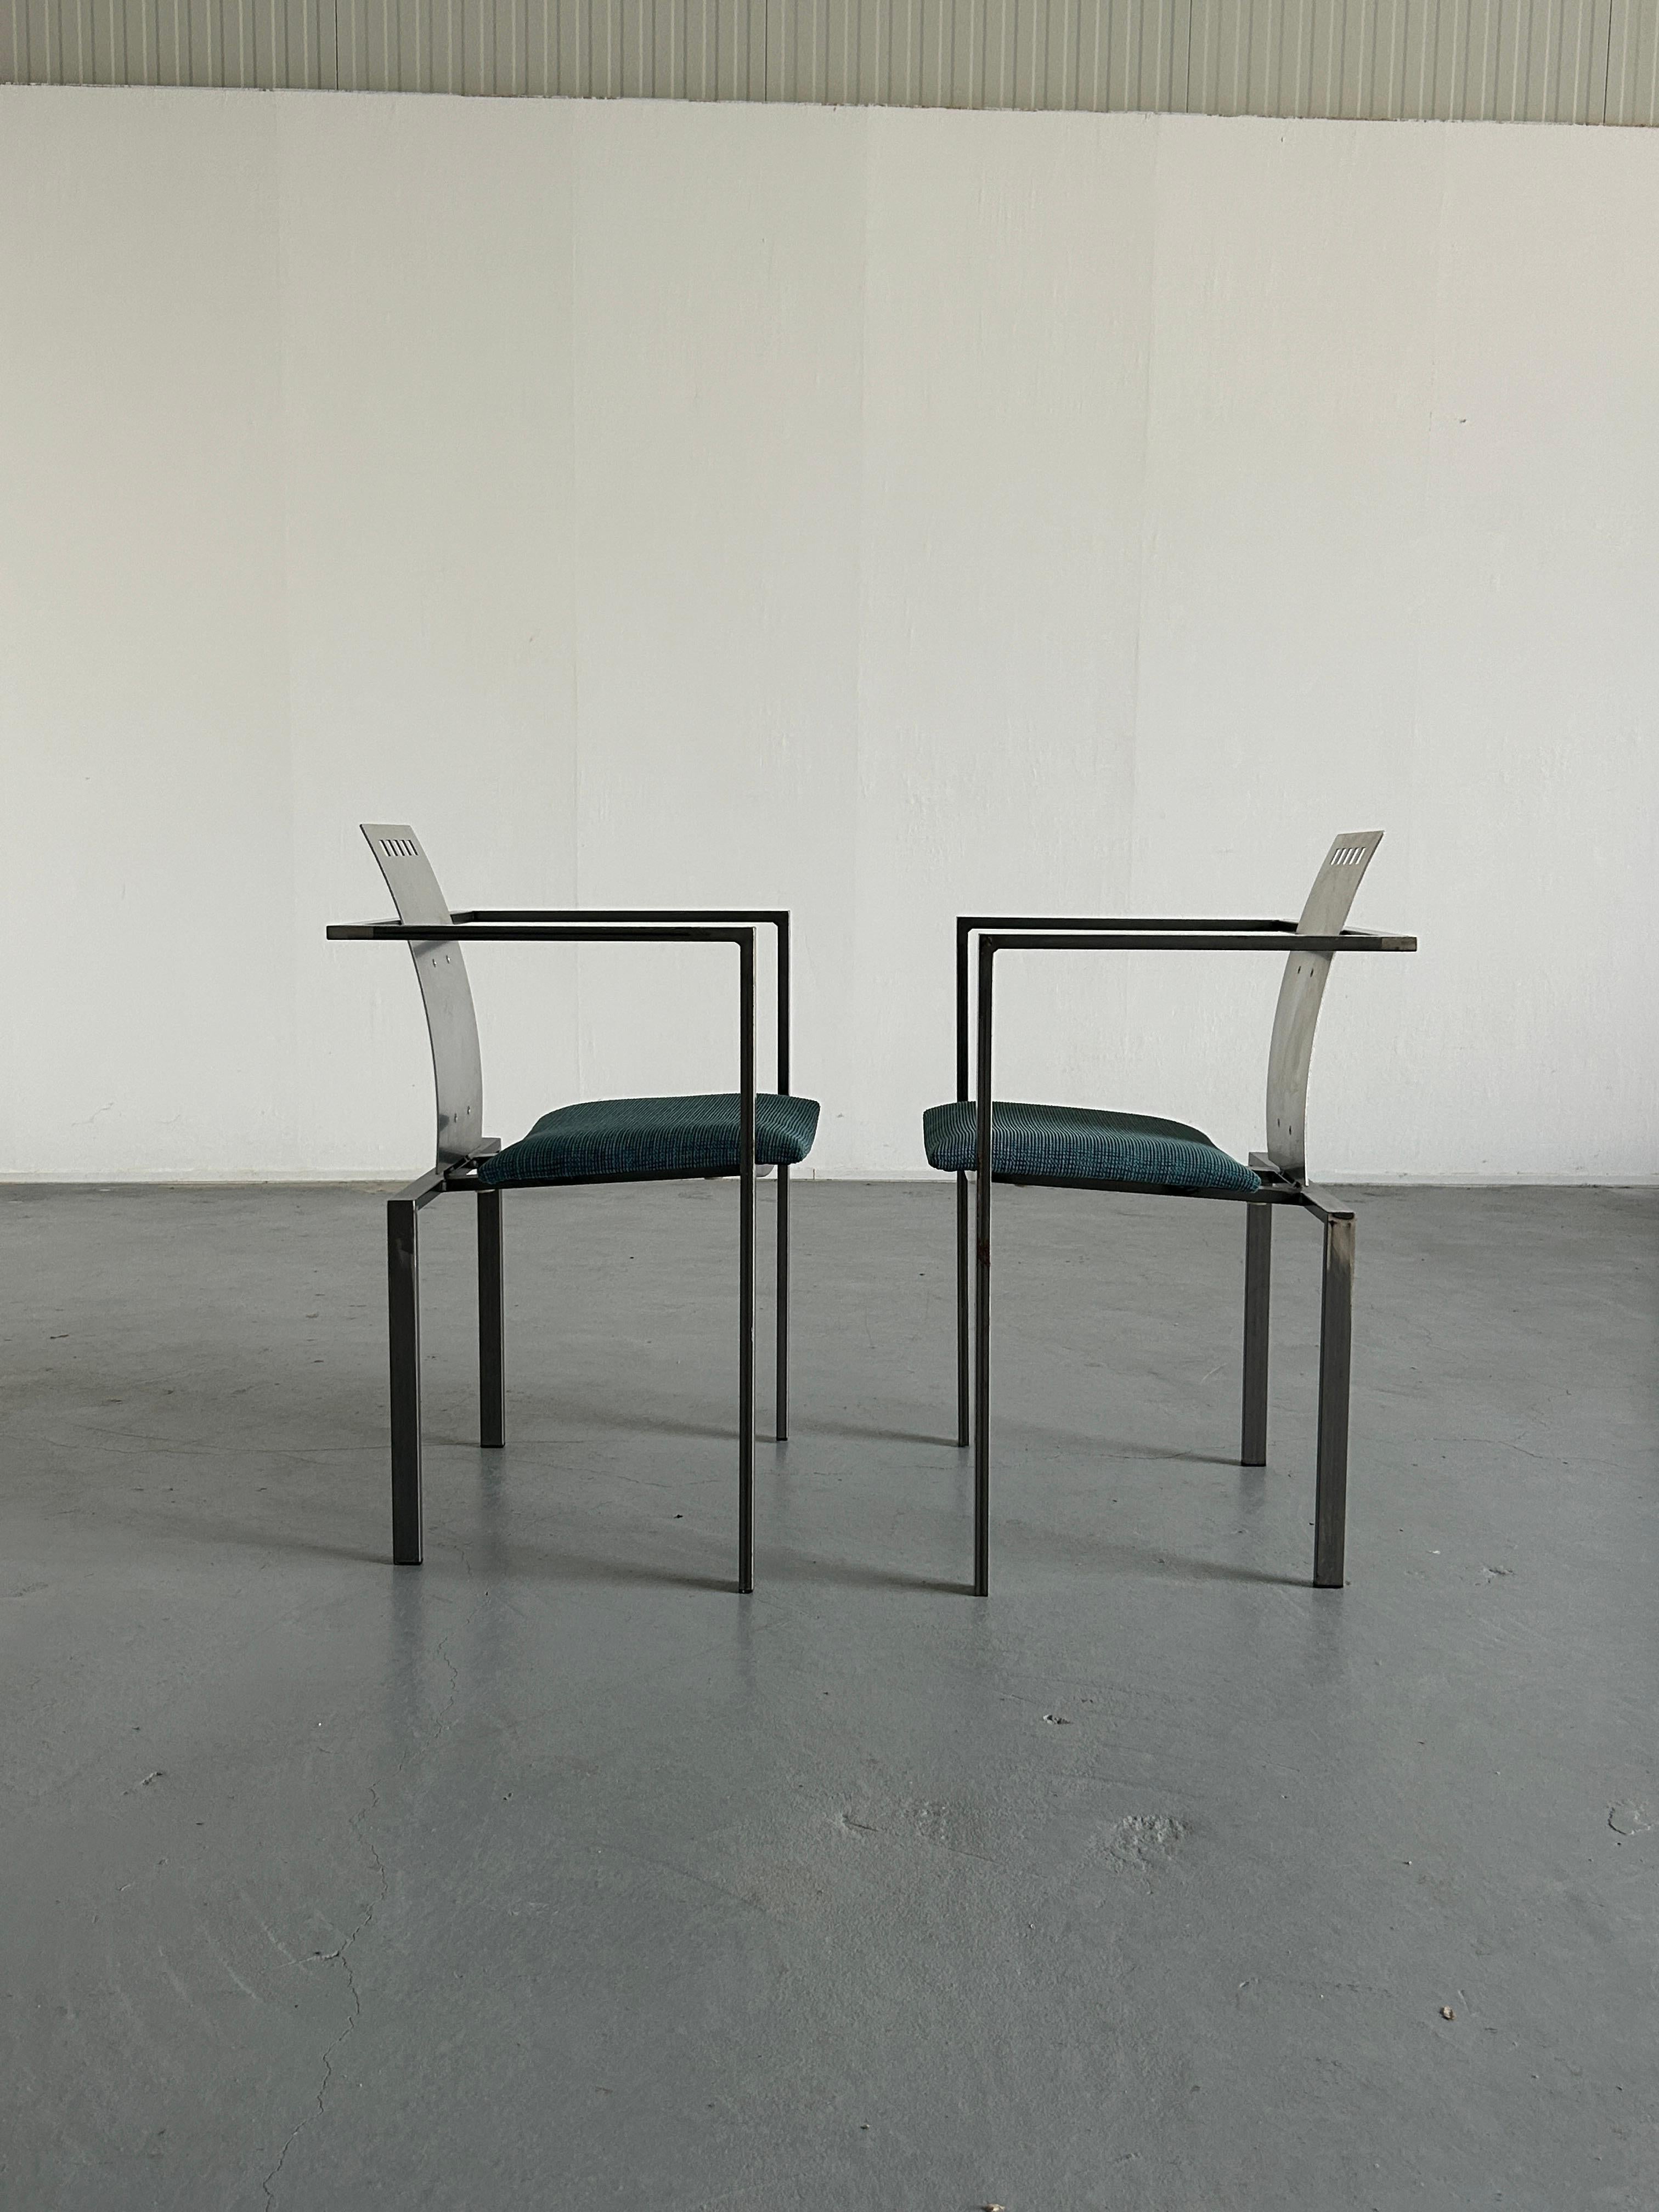 Metal 1 of 2 Memphis Design Postmodern Chairs by Karl Friedrich Förster for KFF, 1980s For Sale